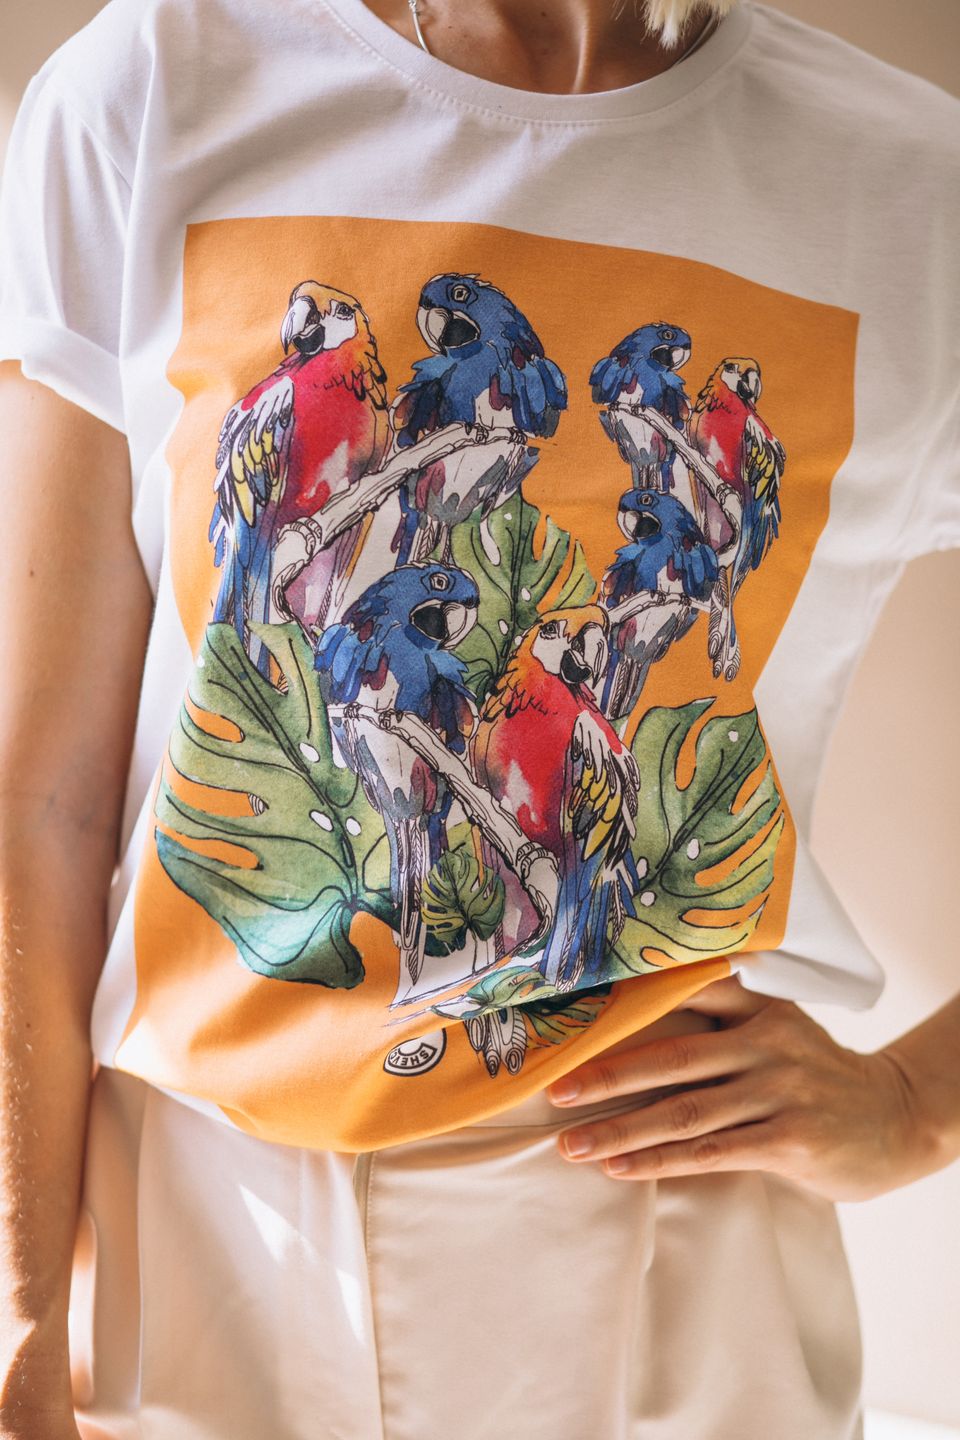 Screen printing t-shirt example using birds and florals